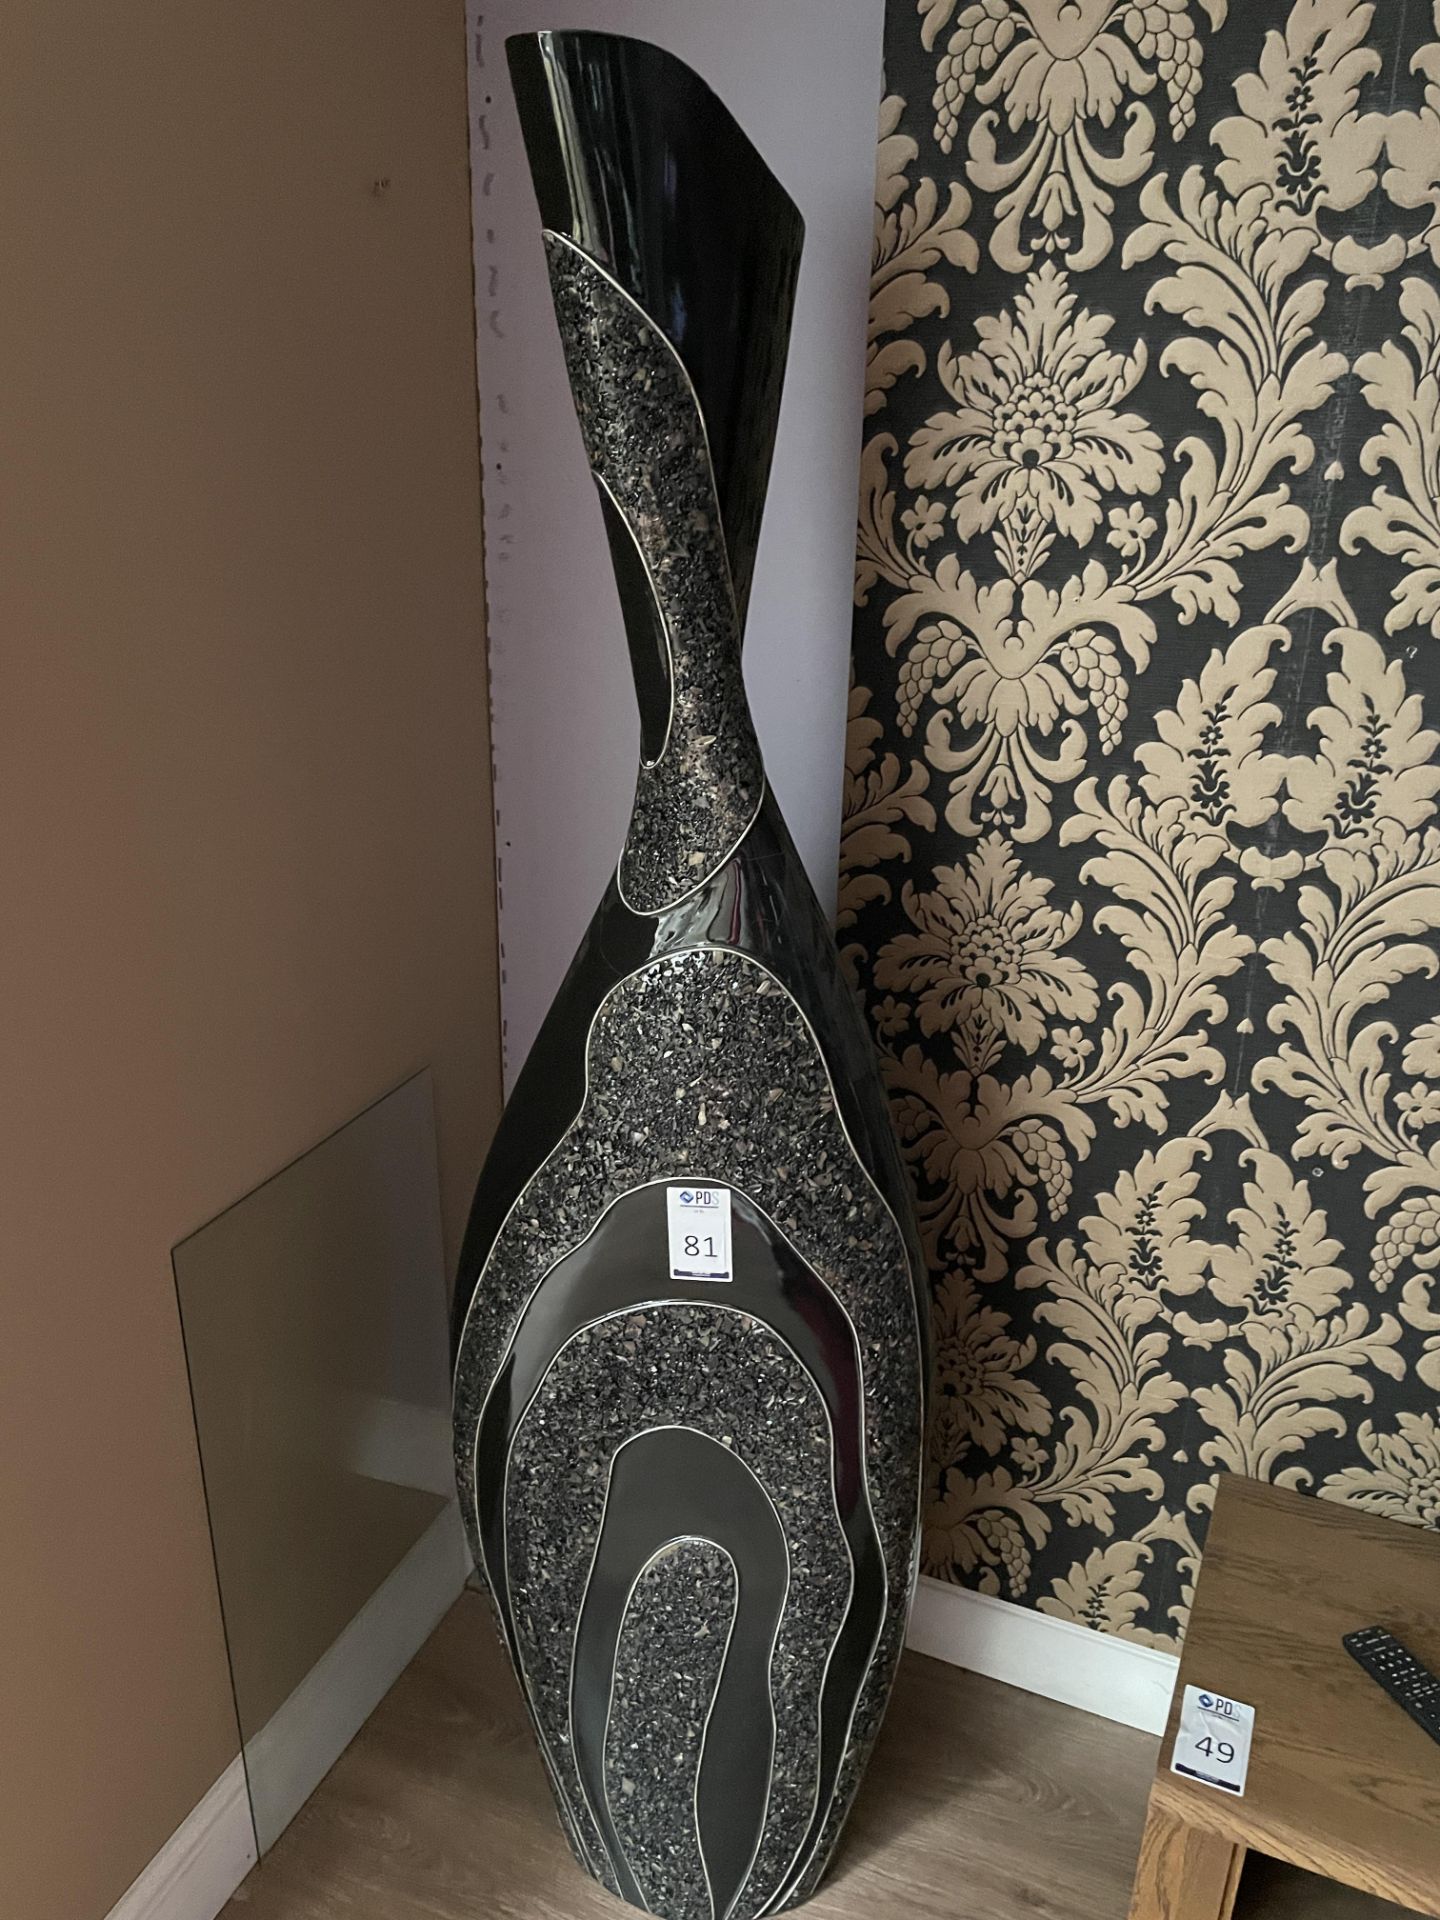 Boraca “Twisted Neck” Decorative Floor Vase, 6’ (Location: High Wycombe. Please Refer to General